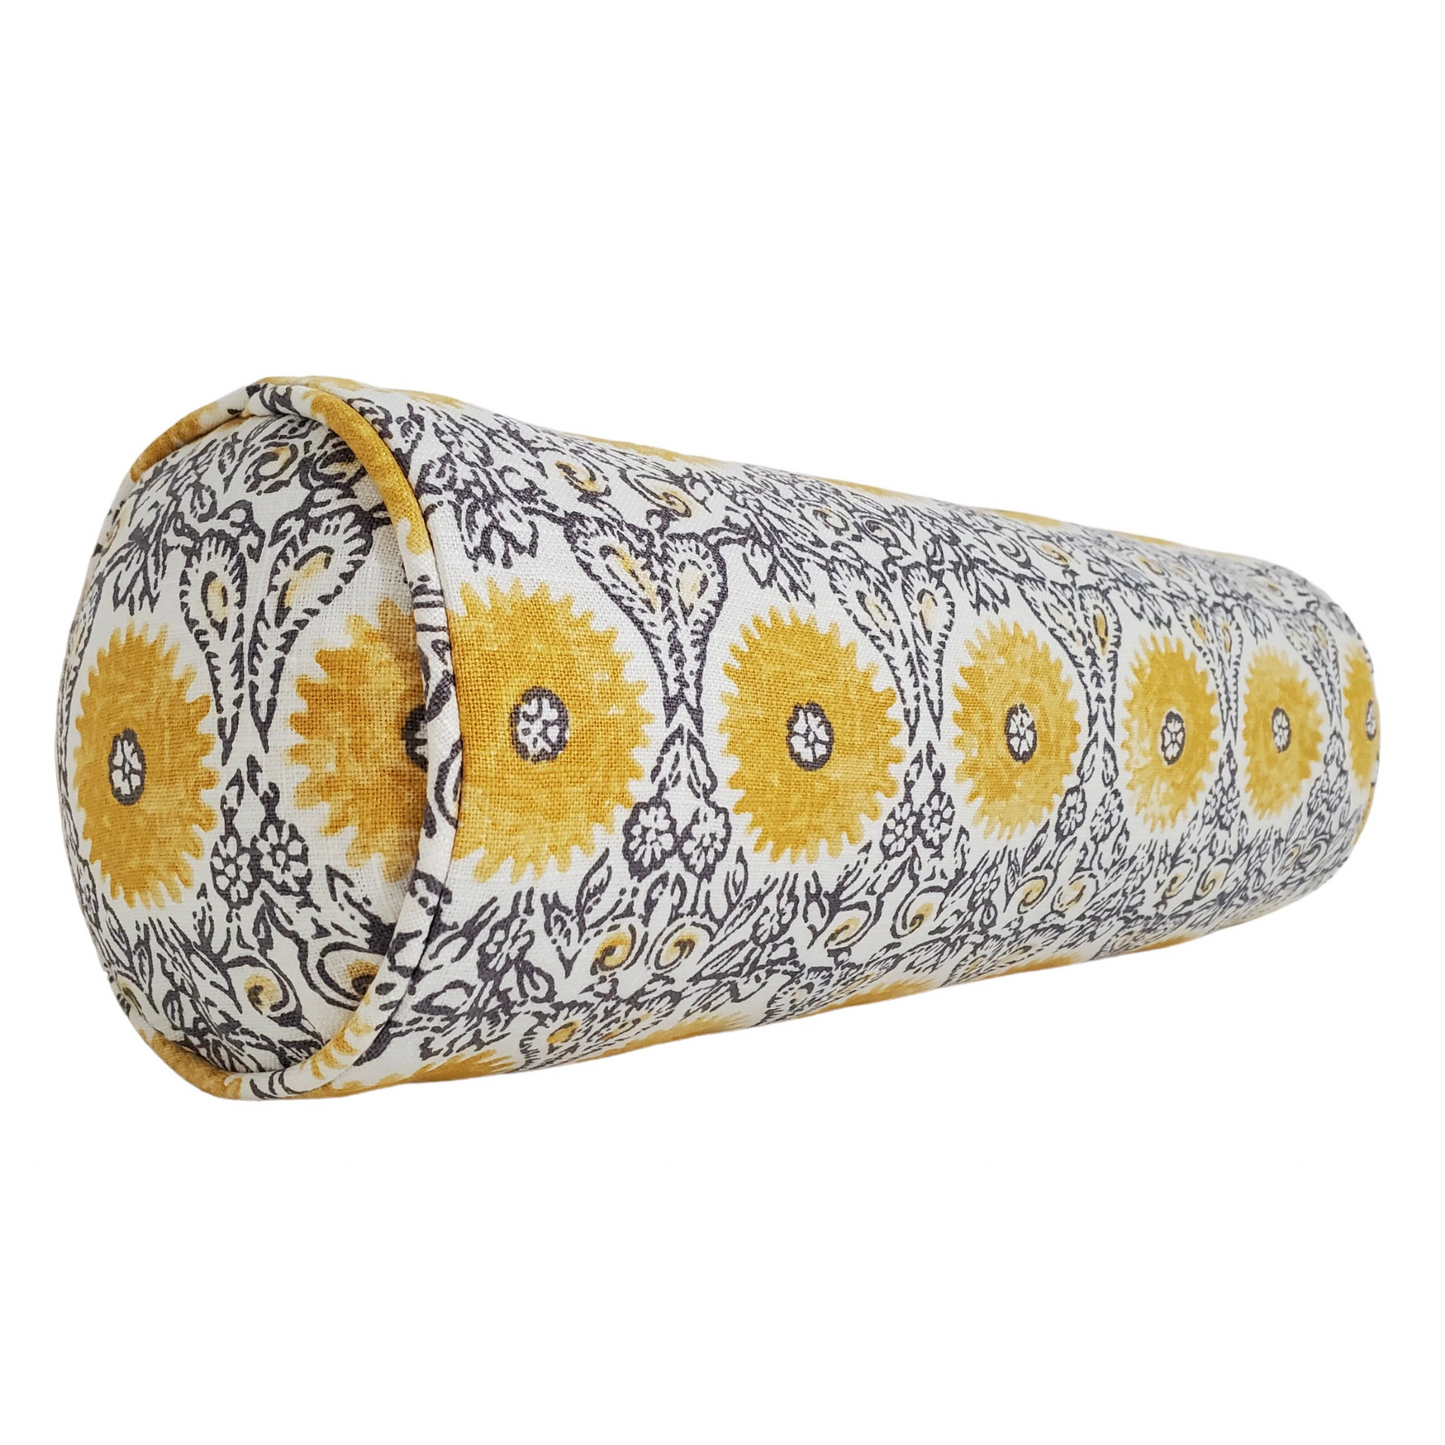 Marigold Bloom Pillow Cover - Available in Lumbar, Bolster, Throw, Euro Sham Sizes